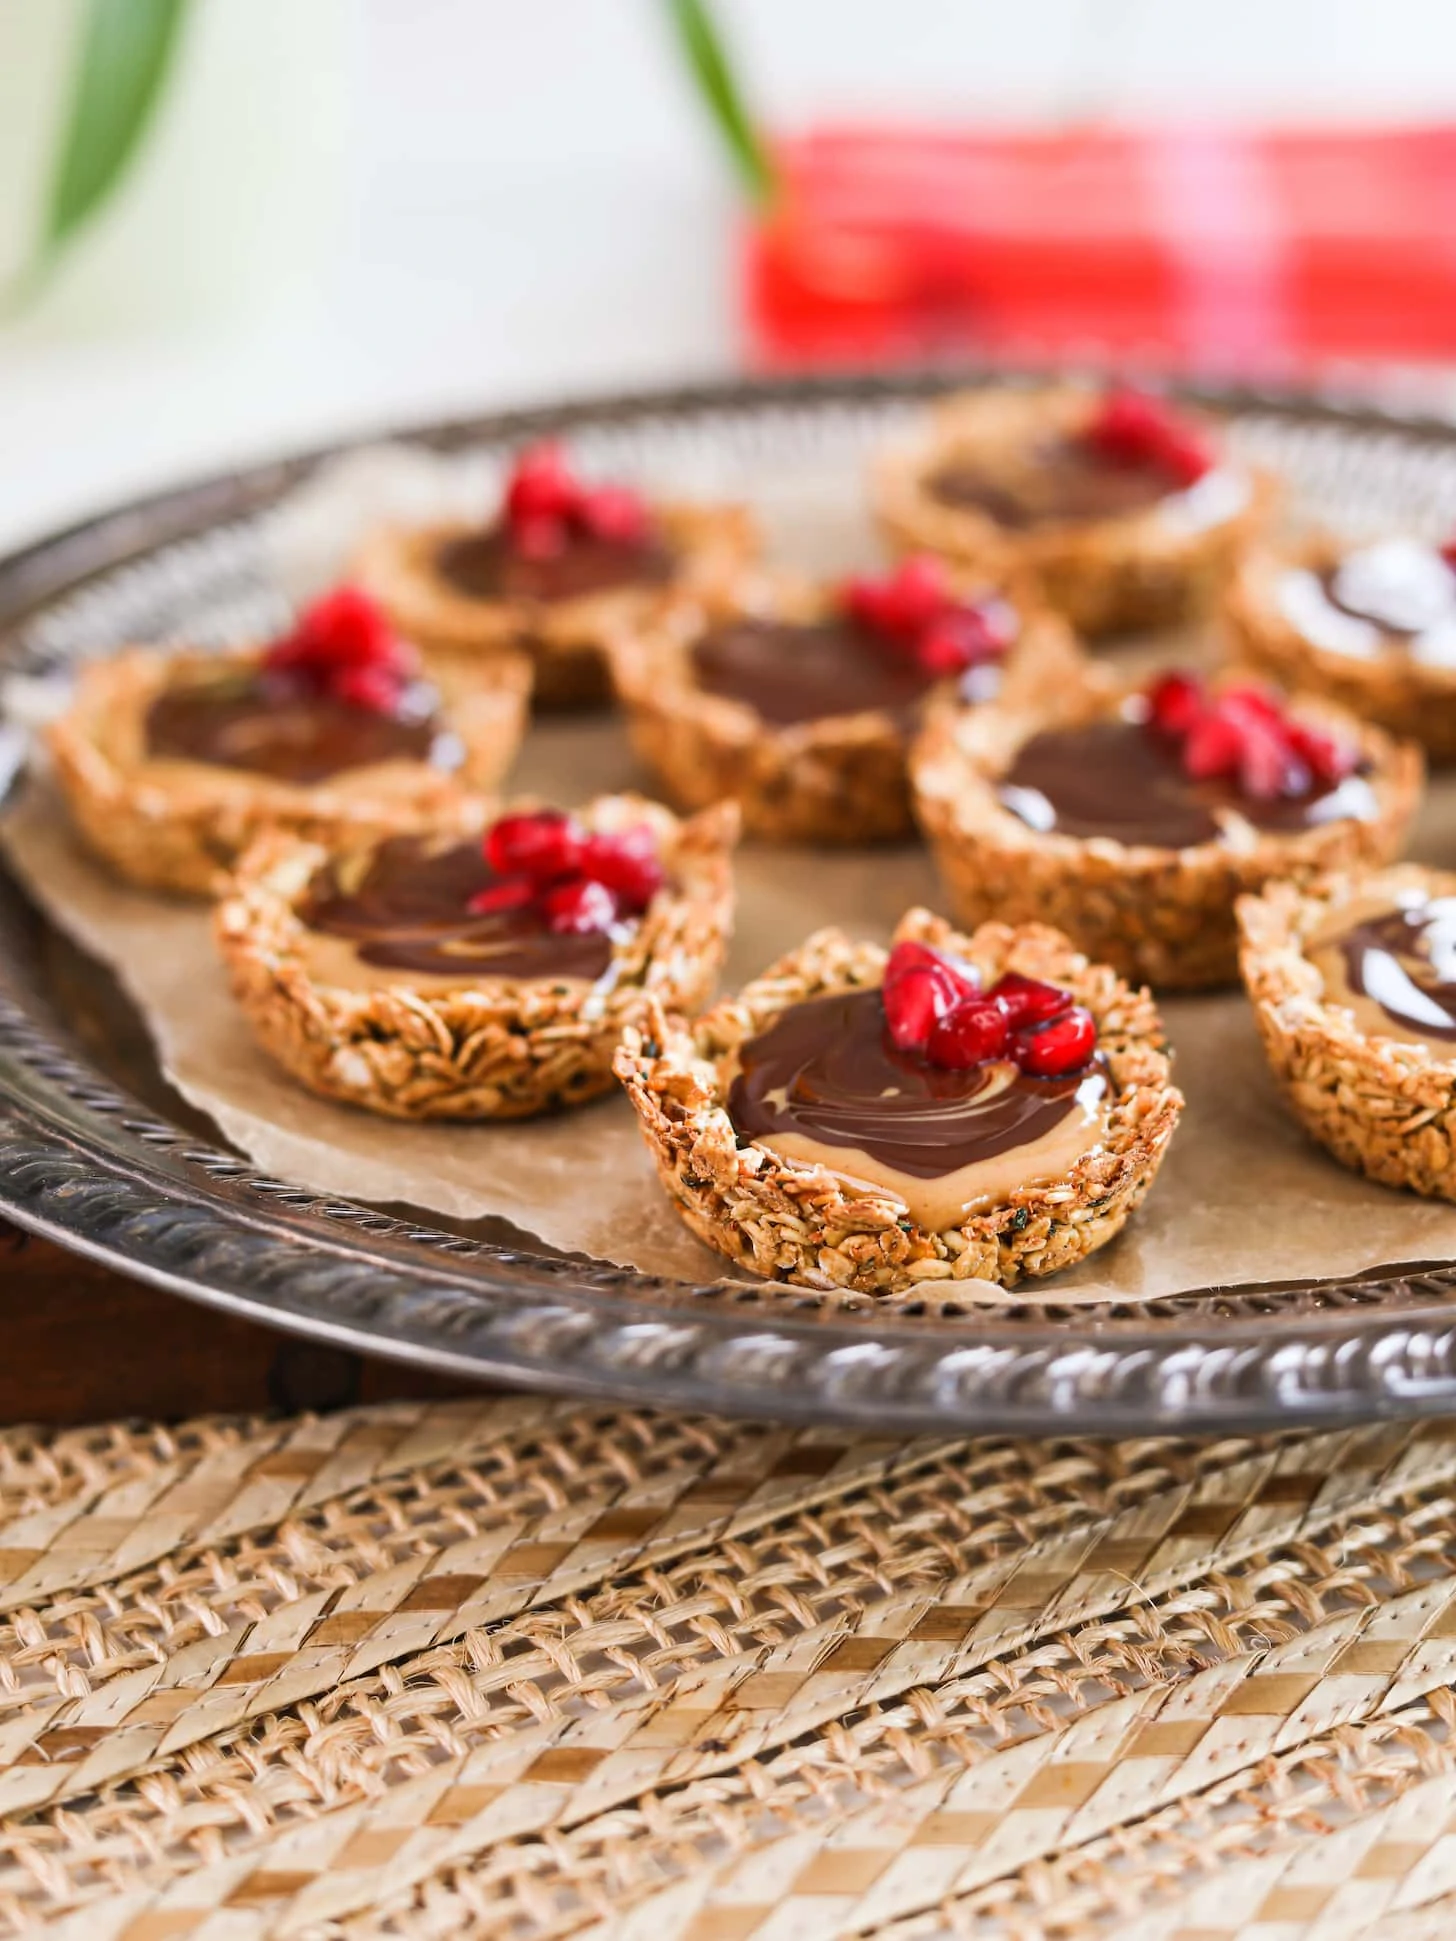 A close up shot of a round tray holding oat cup cookies that are filled with peanut butter and chocolate and topped with pomegranate kernels.